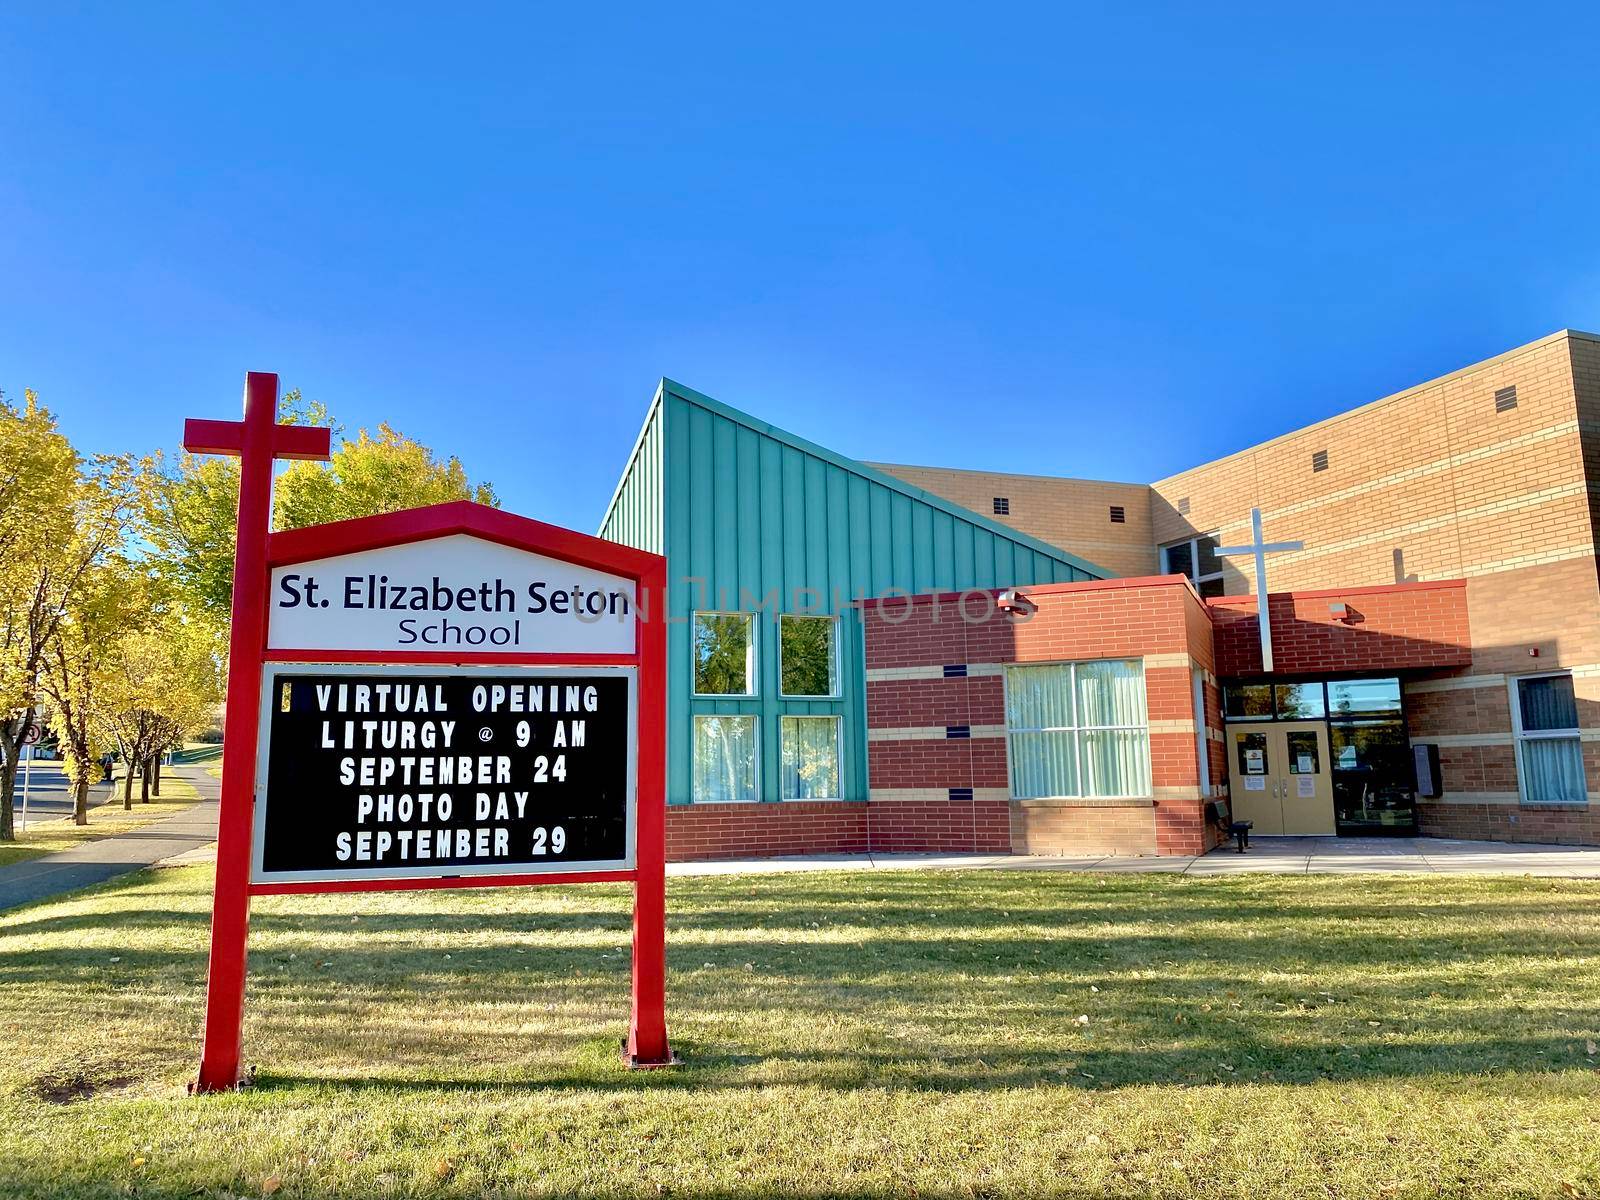 Calgary, Alberta. Canada. Sep 27, 2020. Front view of a St. Elizabeth Seton School. Students are back to school during pandemic covid 19, coronavirus. Illustrative by oasisamuel